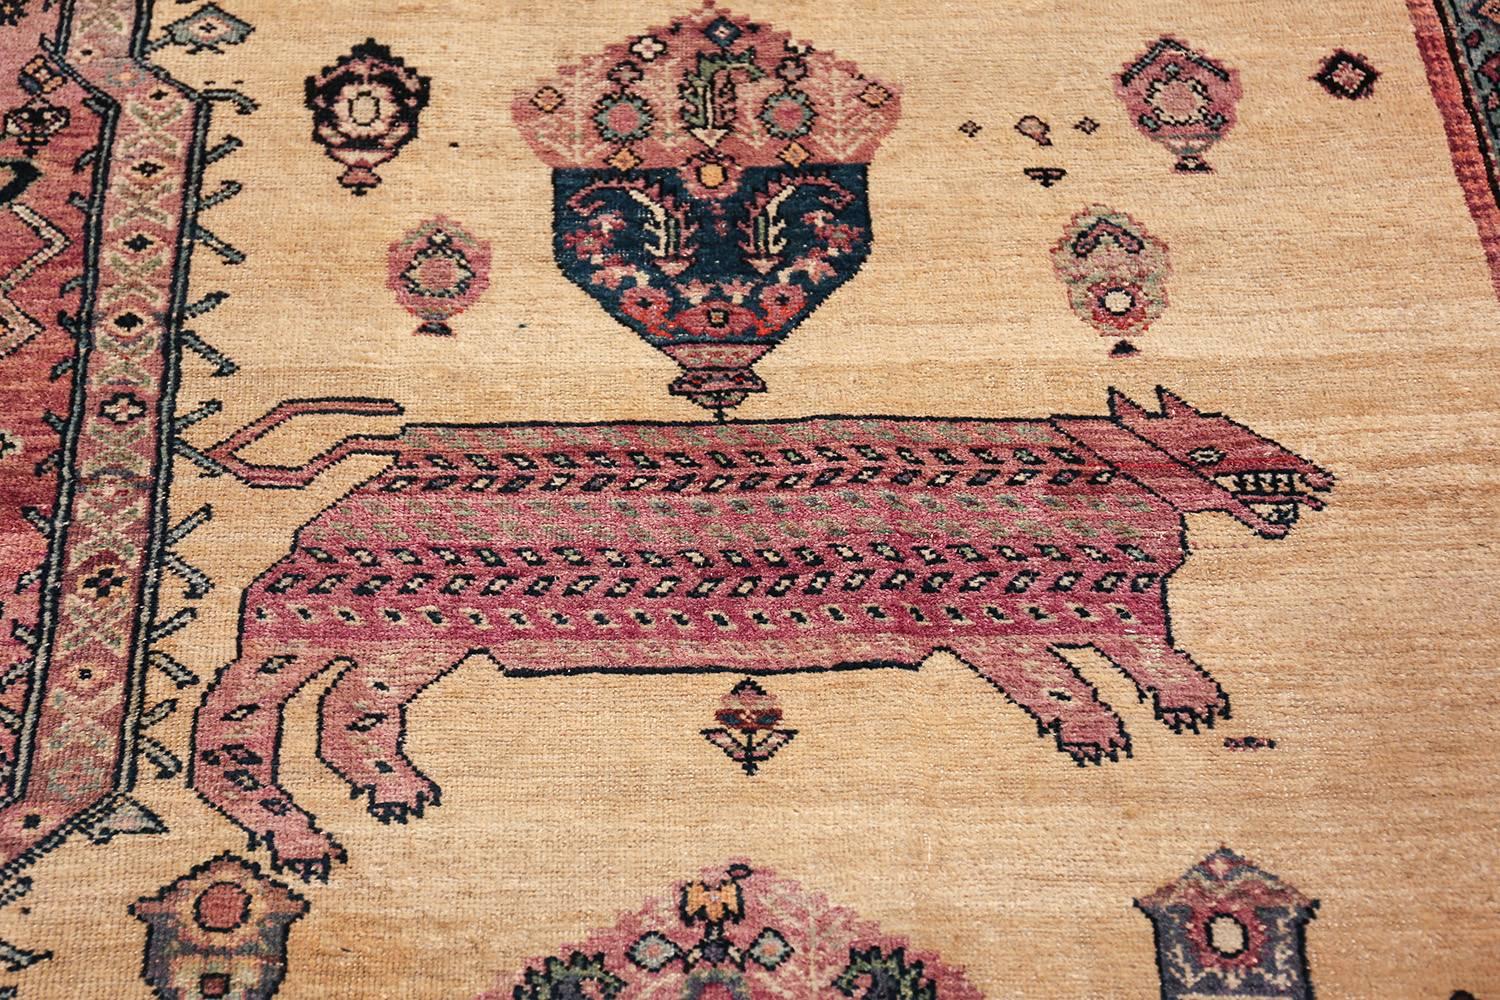 Magnificent Large Tribal Animal Motif Antique Persian Farahan Rug, Country of Origin / Rug Type: Persian Rug, Circa Date: Late 19th Century. Size: 12 ft 2 in x 16 ft (3.71 m x 4.88 m)

This rare antique Persian carpet is truly a one of a kind work